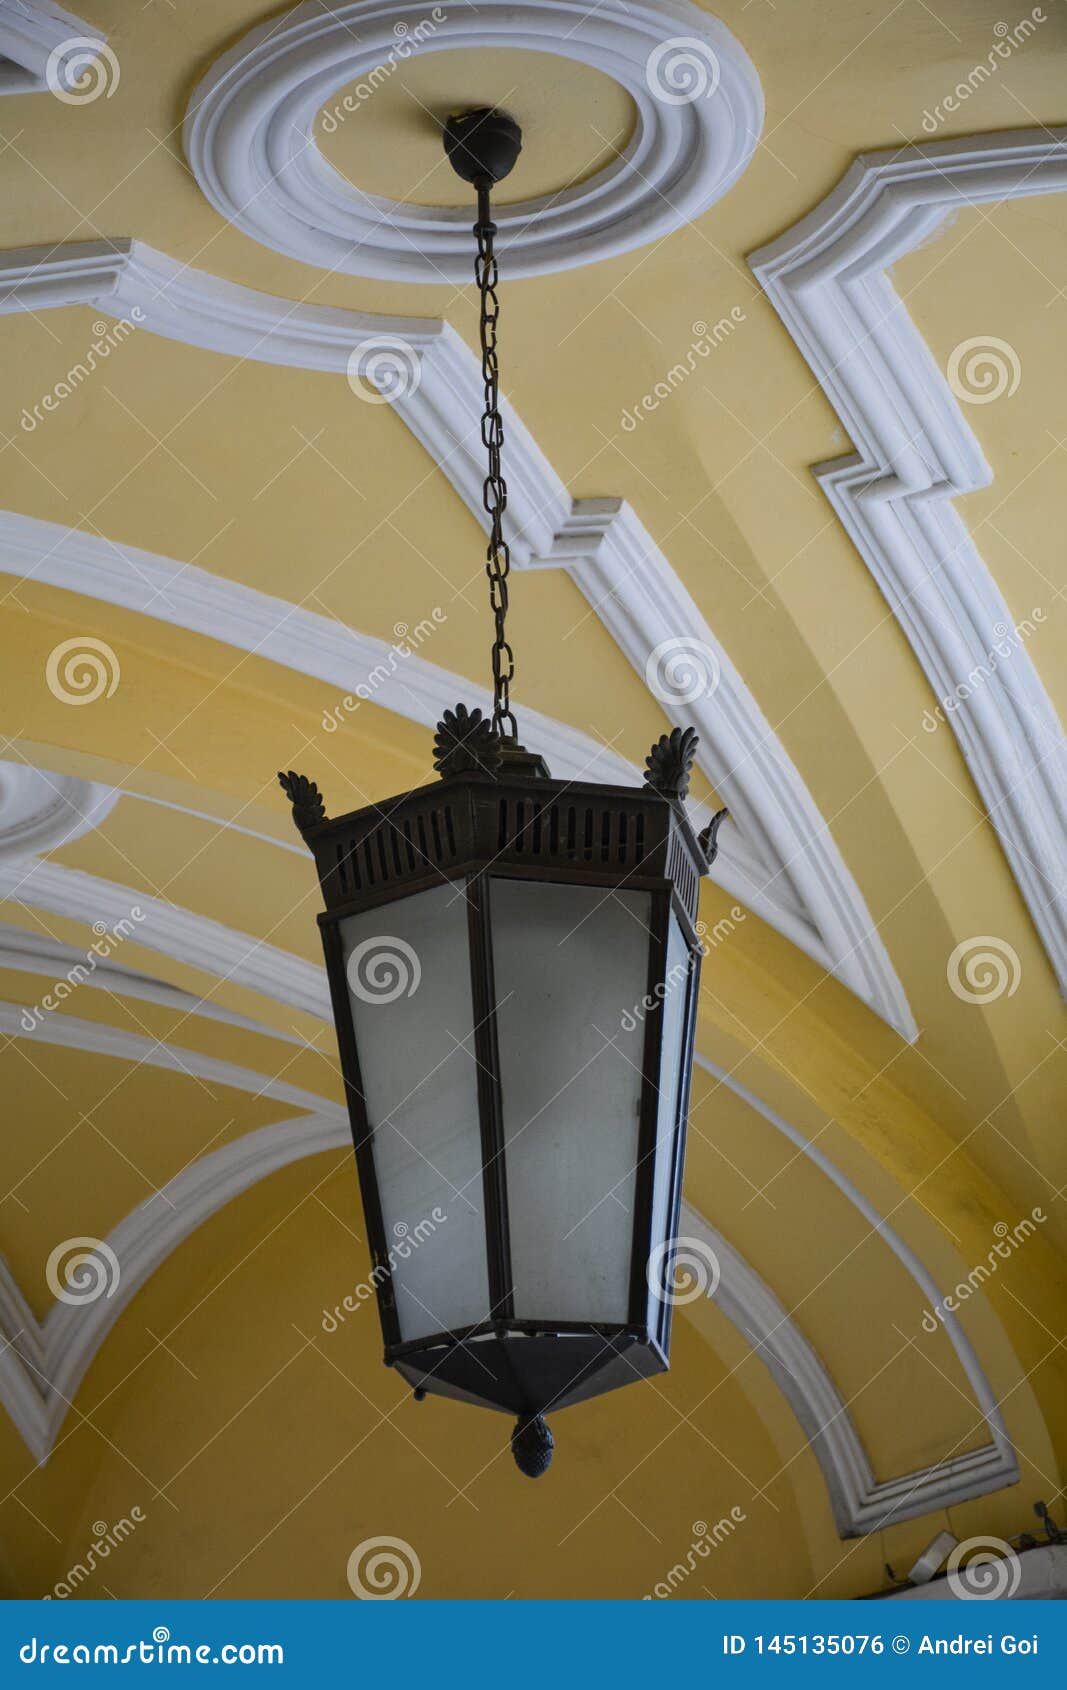 Vintage Lamp Under The Ceiling In The Gallery Stock Photo Image